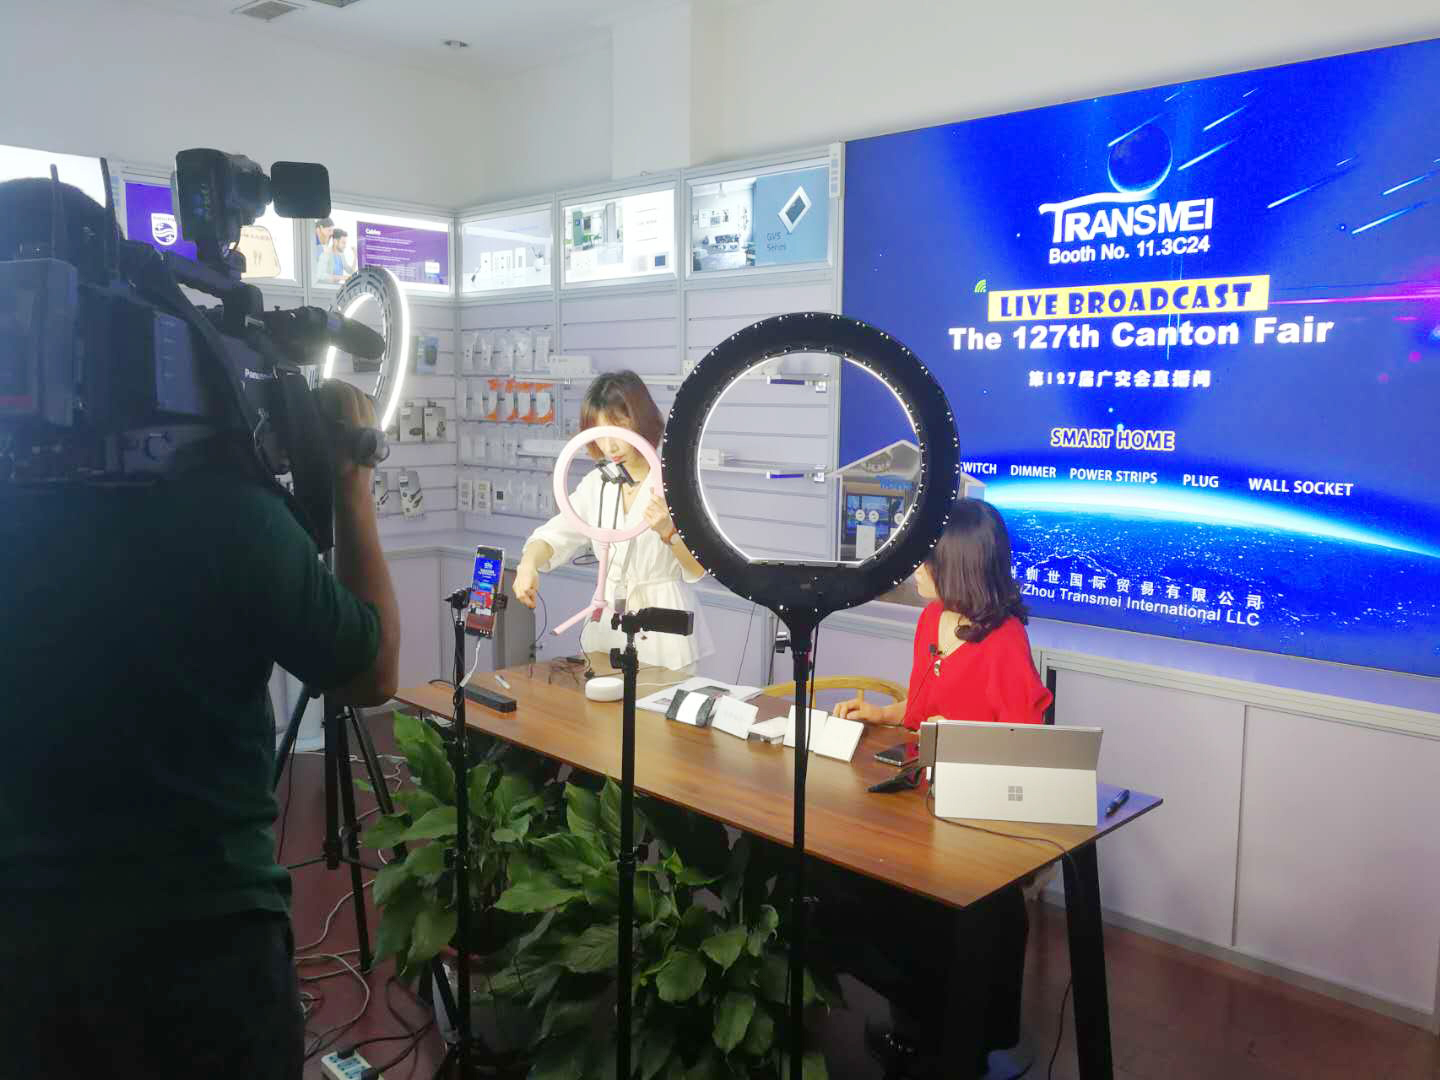 Thanks to Changzhou TV for the interview